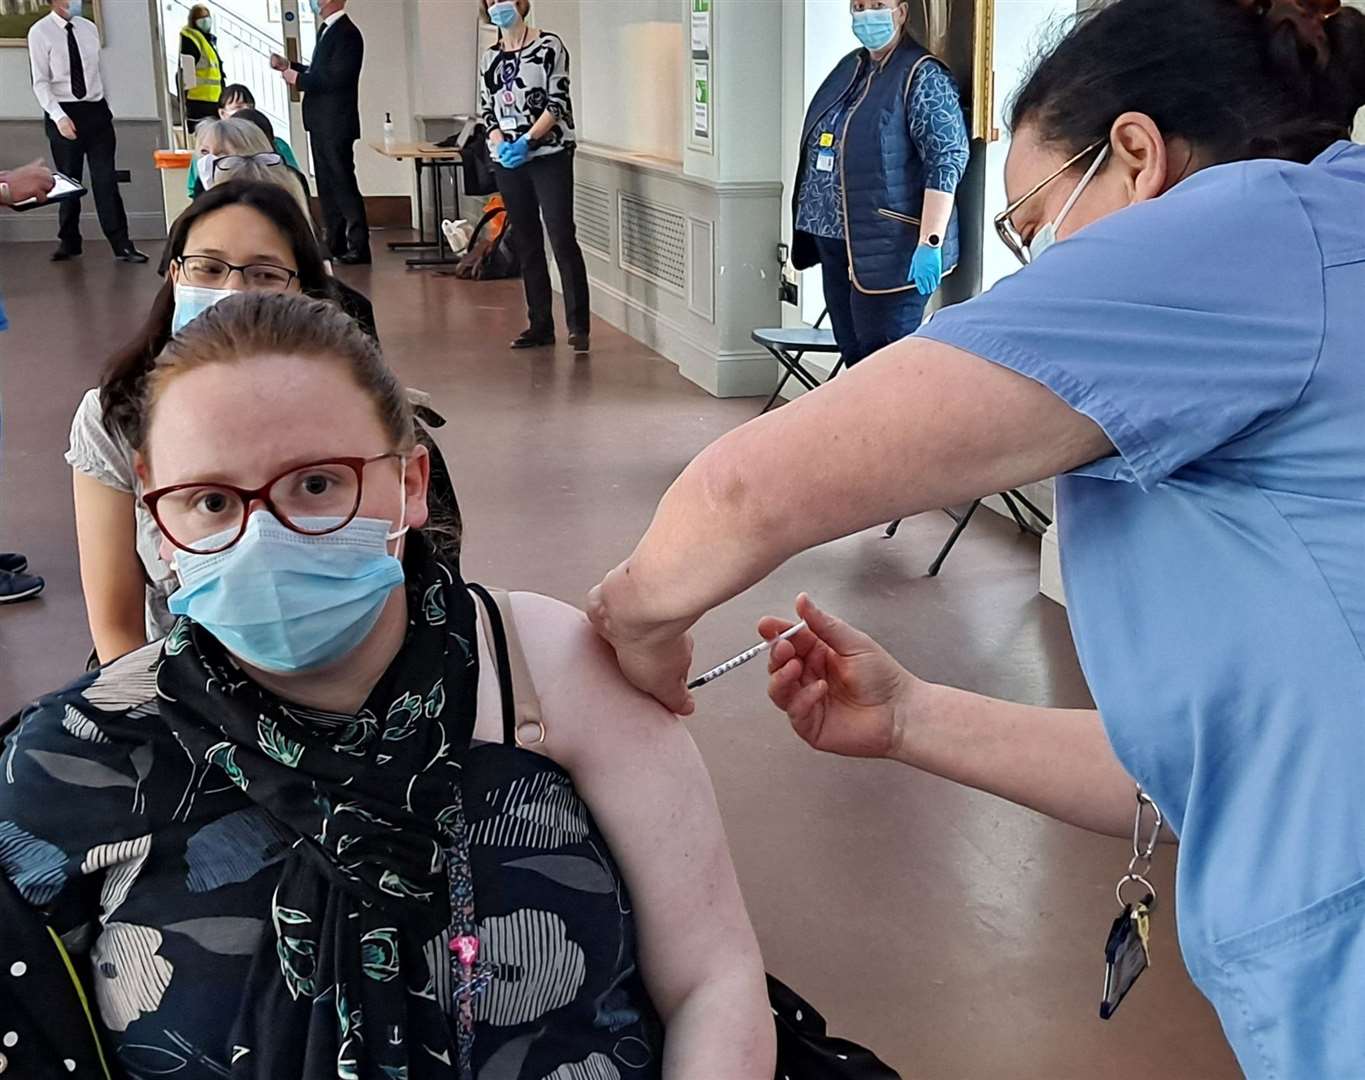 Sophie Hammond the first to get the jab, from Jenica Brezeneau. Picture:East Kent Hospitals University NHS Foundation Trust